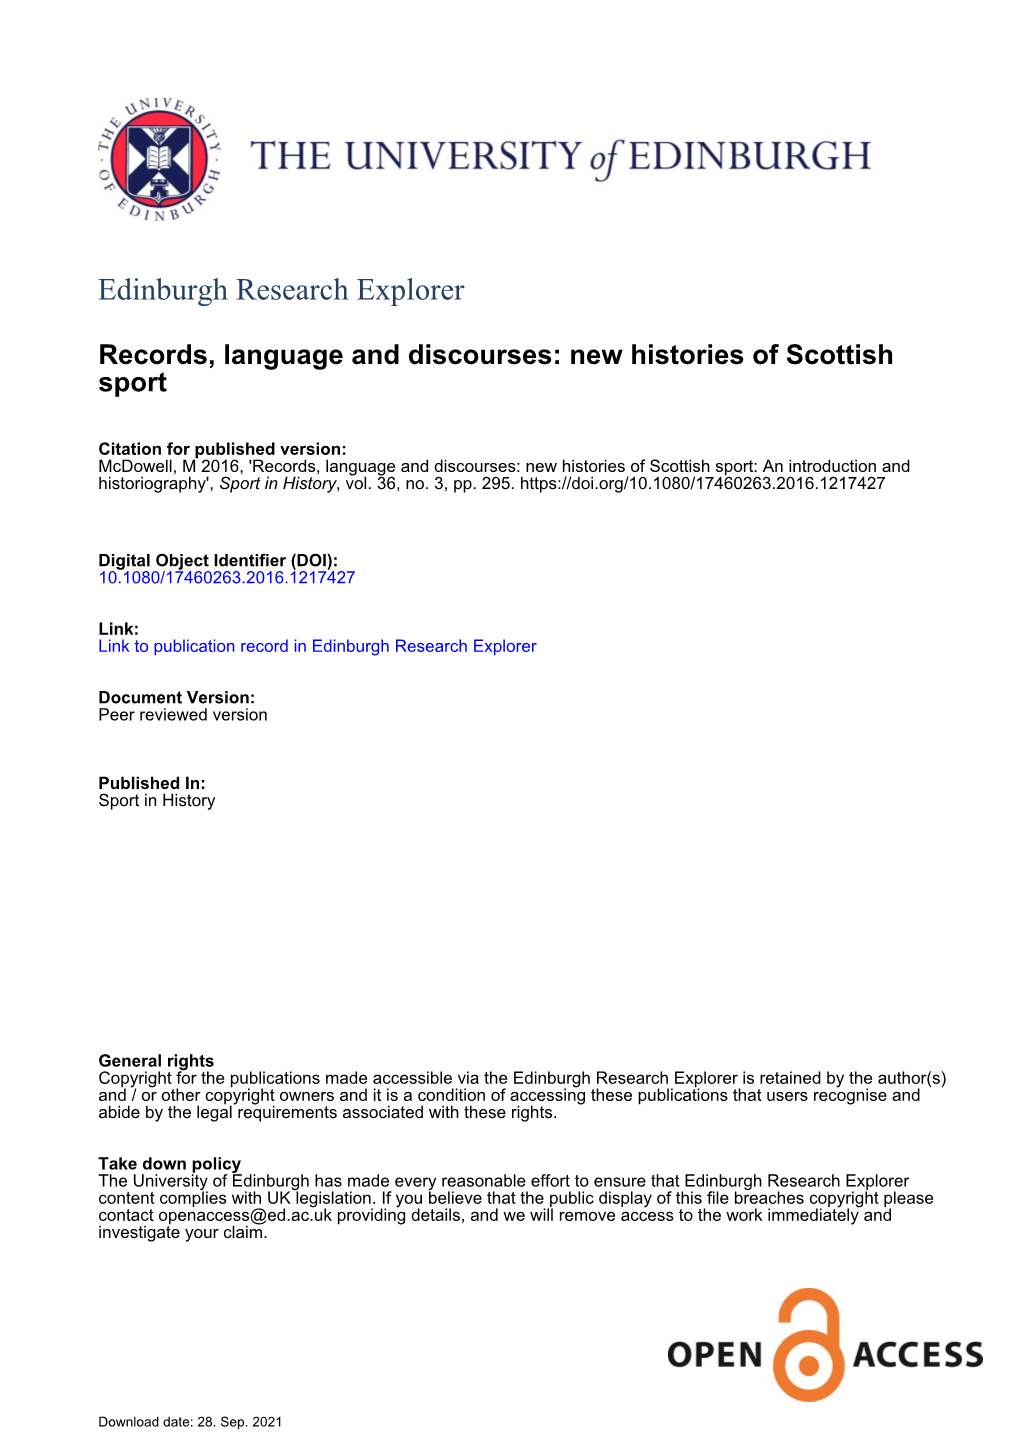 Records, Language and Discourses: New Histories of Scottish Sport